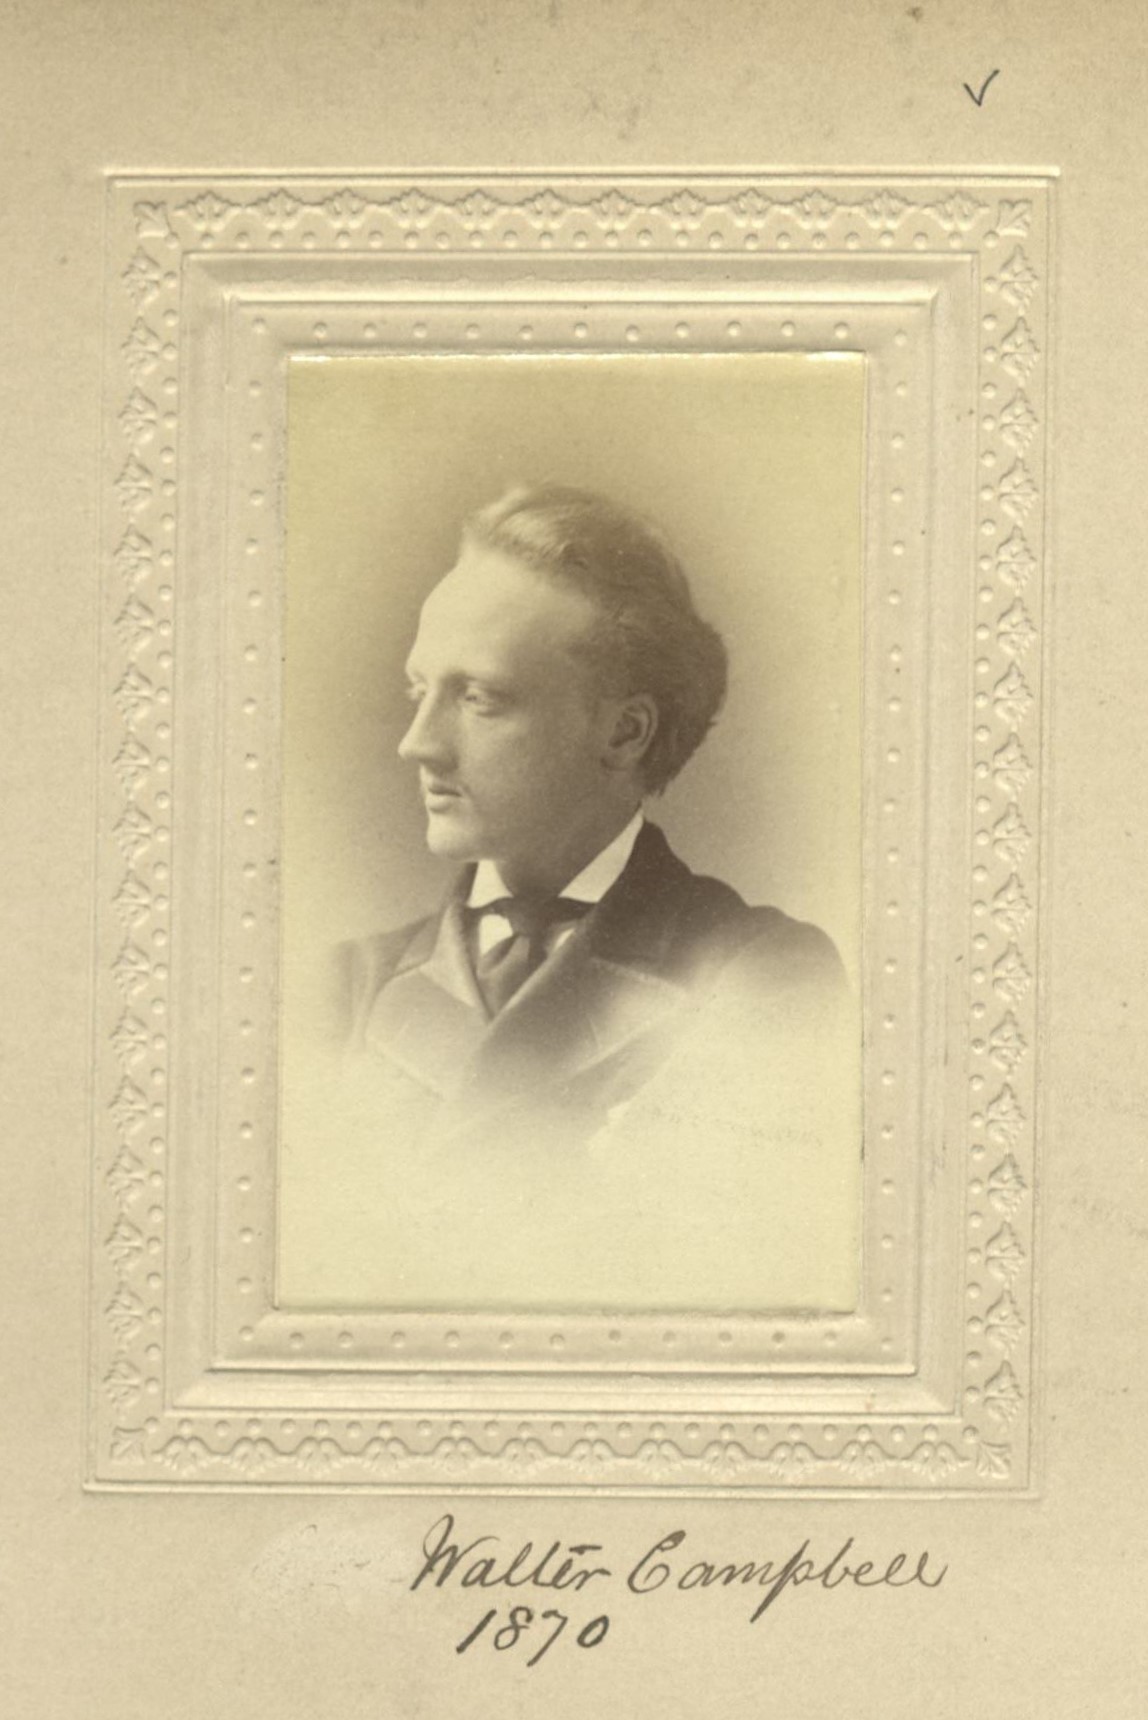 Member portrait of Walter Campbell